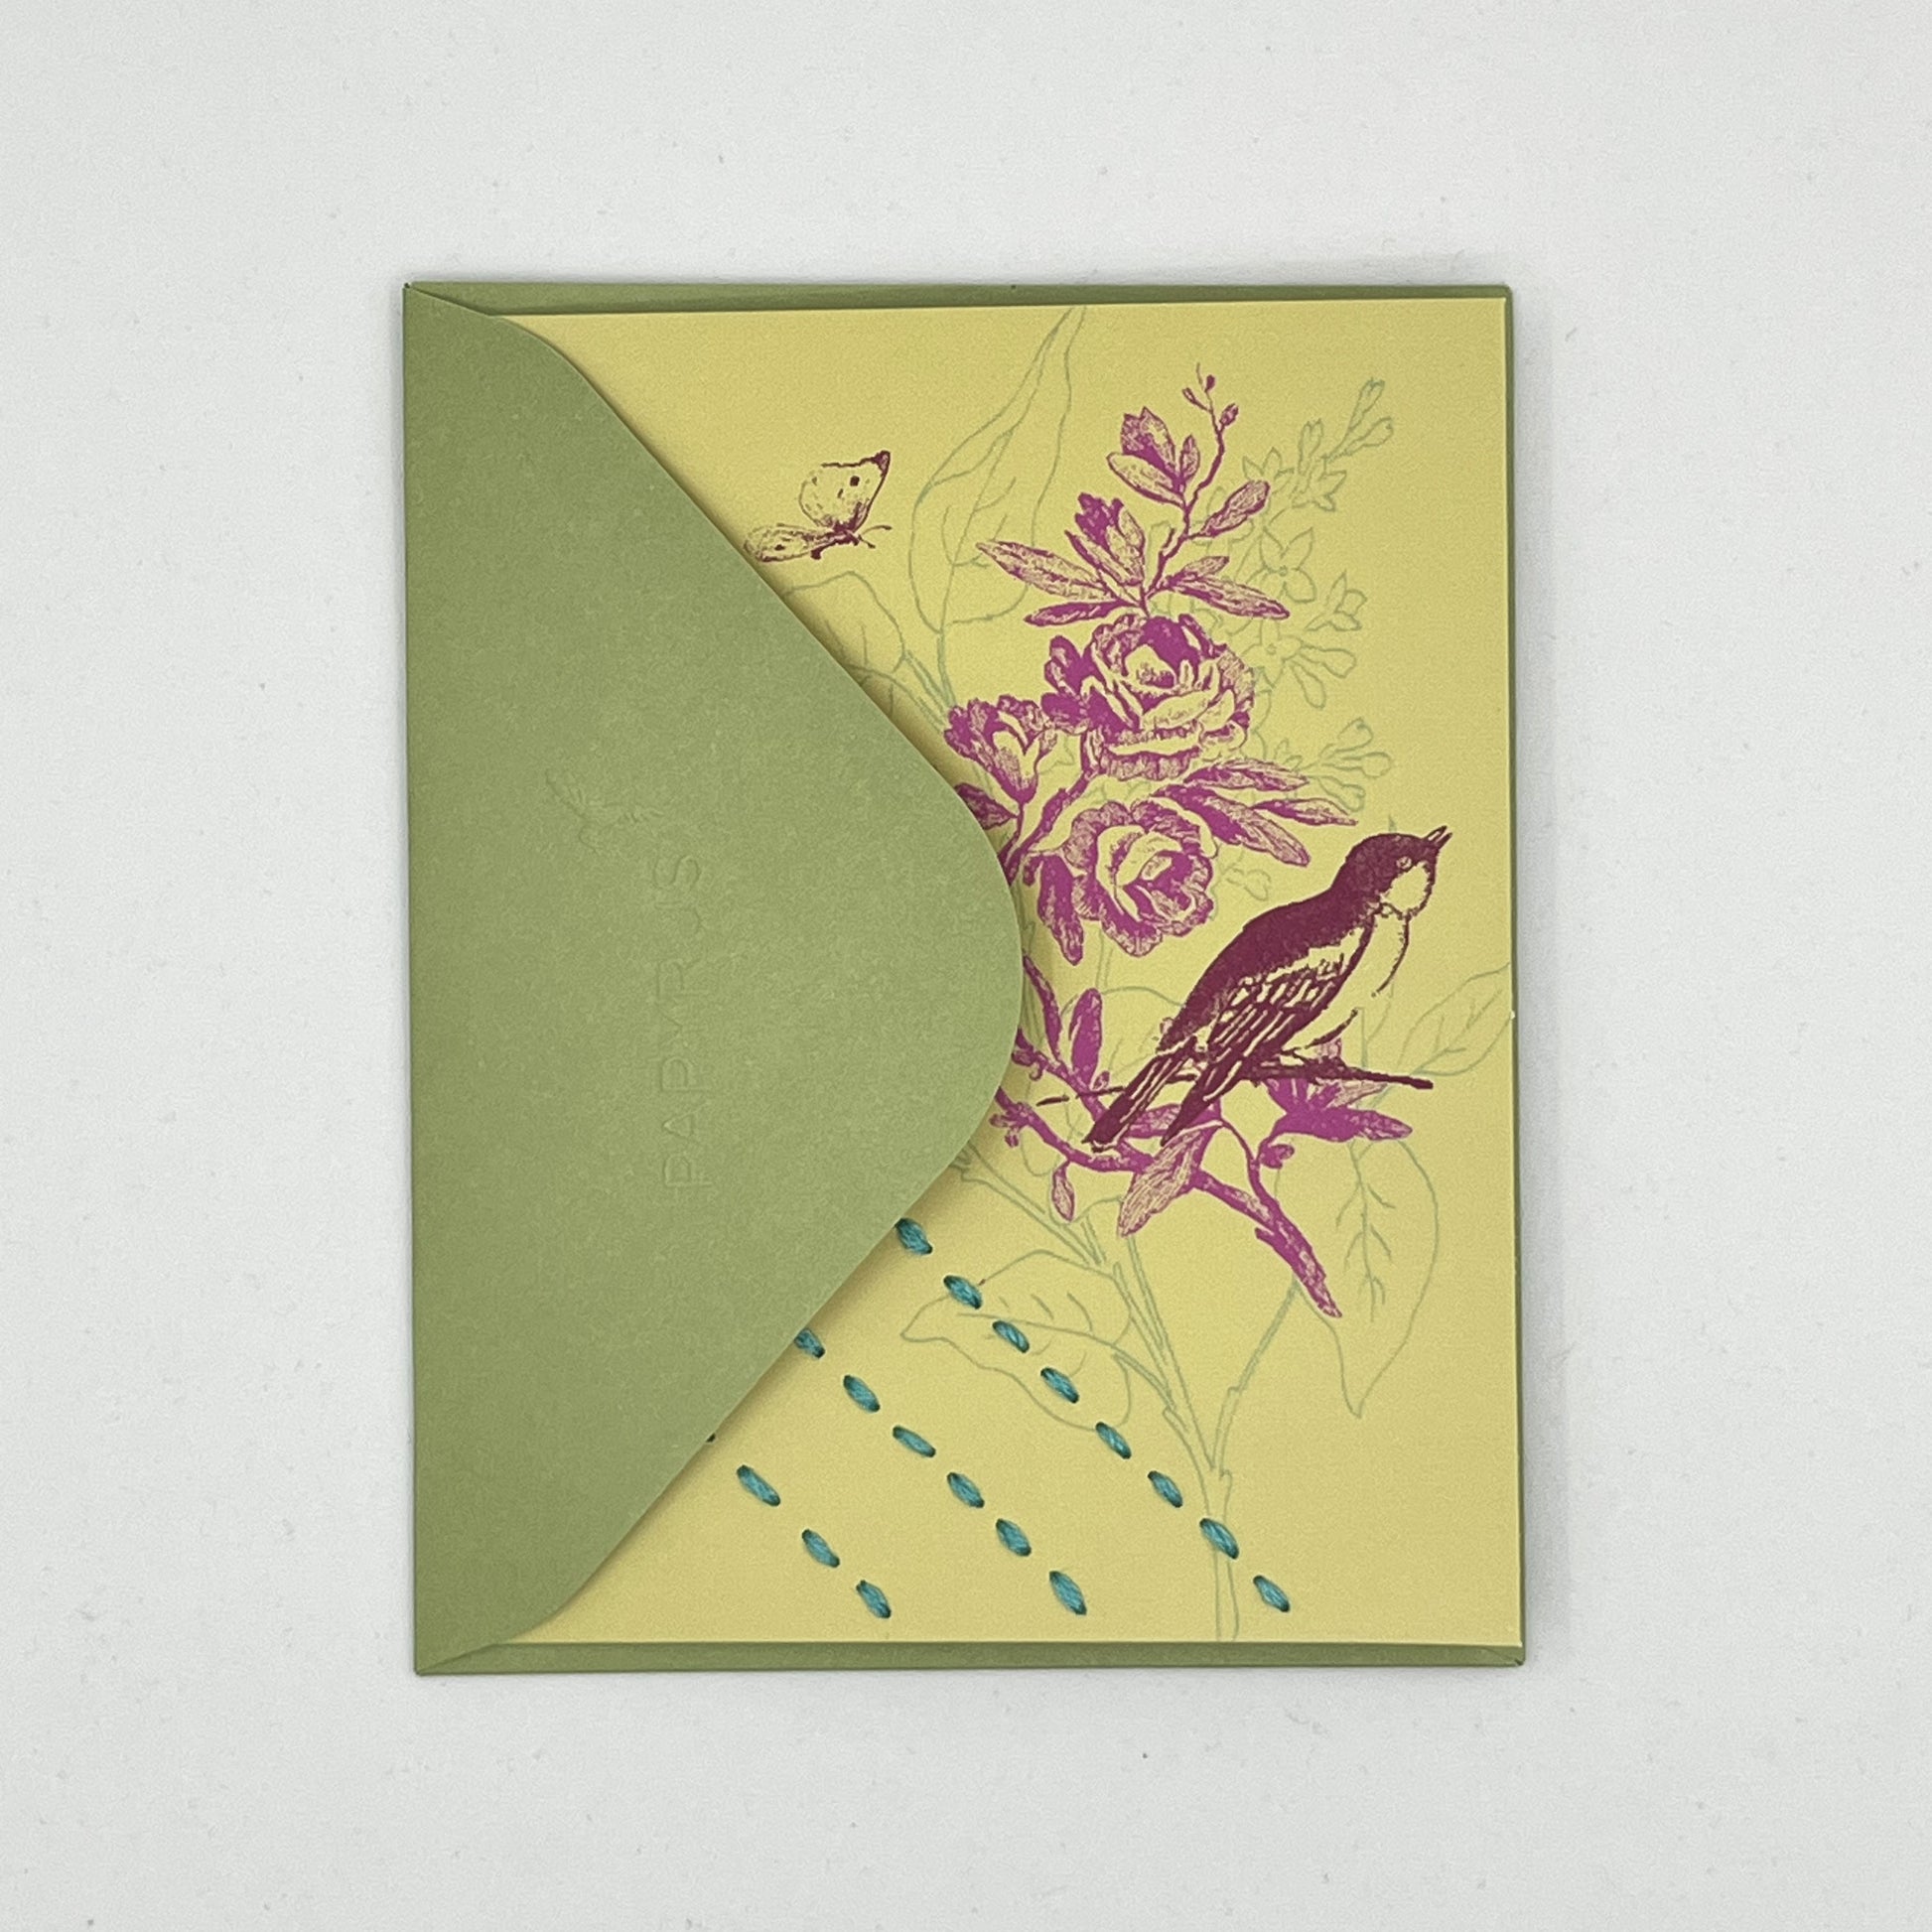 a chartreuse greeting card laying flat, tucked into the flap of a green envelope, with a sparrow and flowers printed on it in brick red and fuchsia, hand stitched over with 3 rows of running stitches in blue, diagonally over the bottom left corner